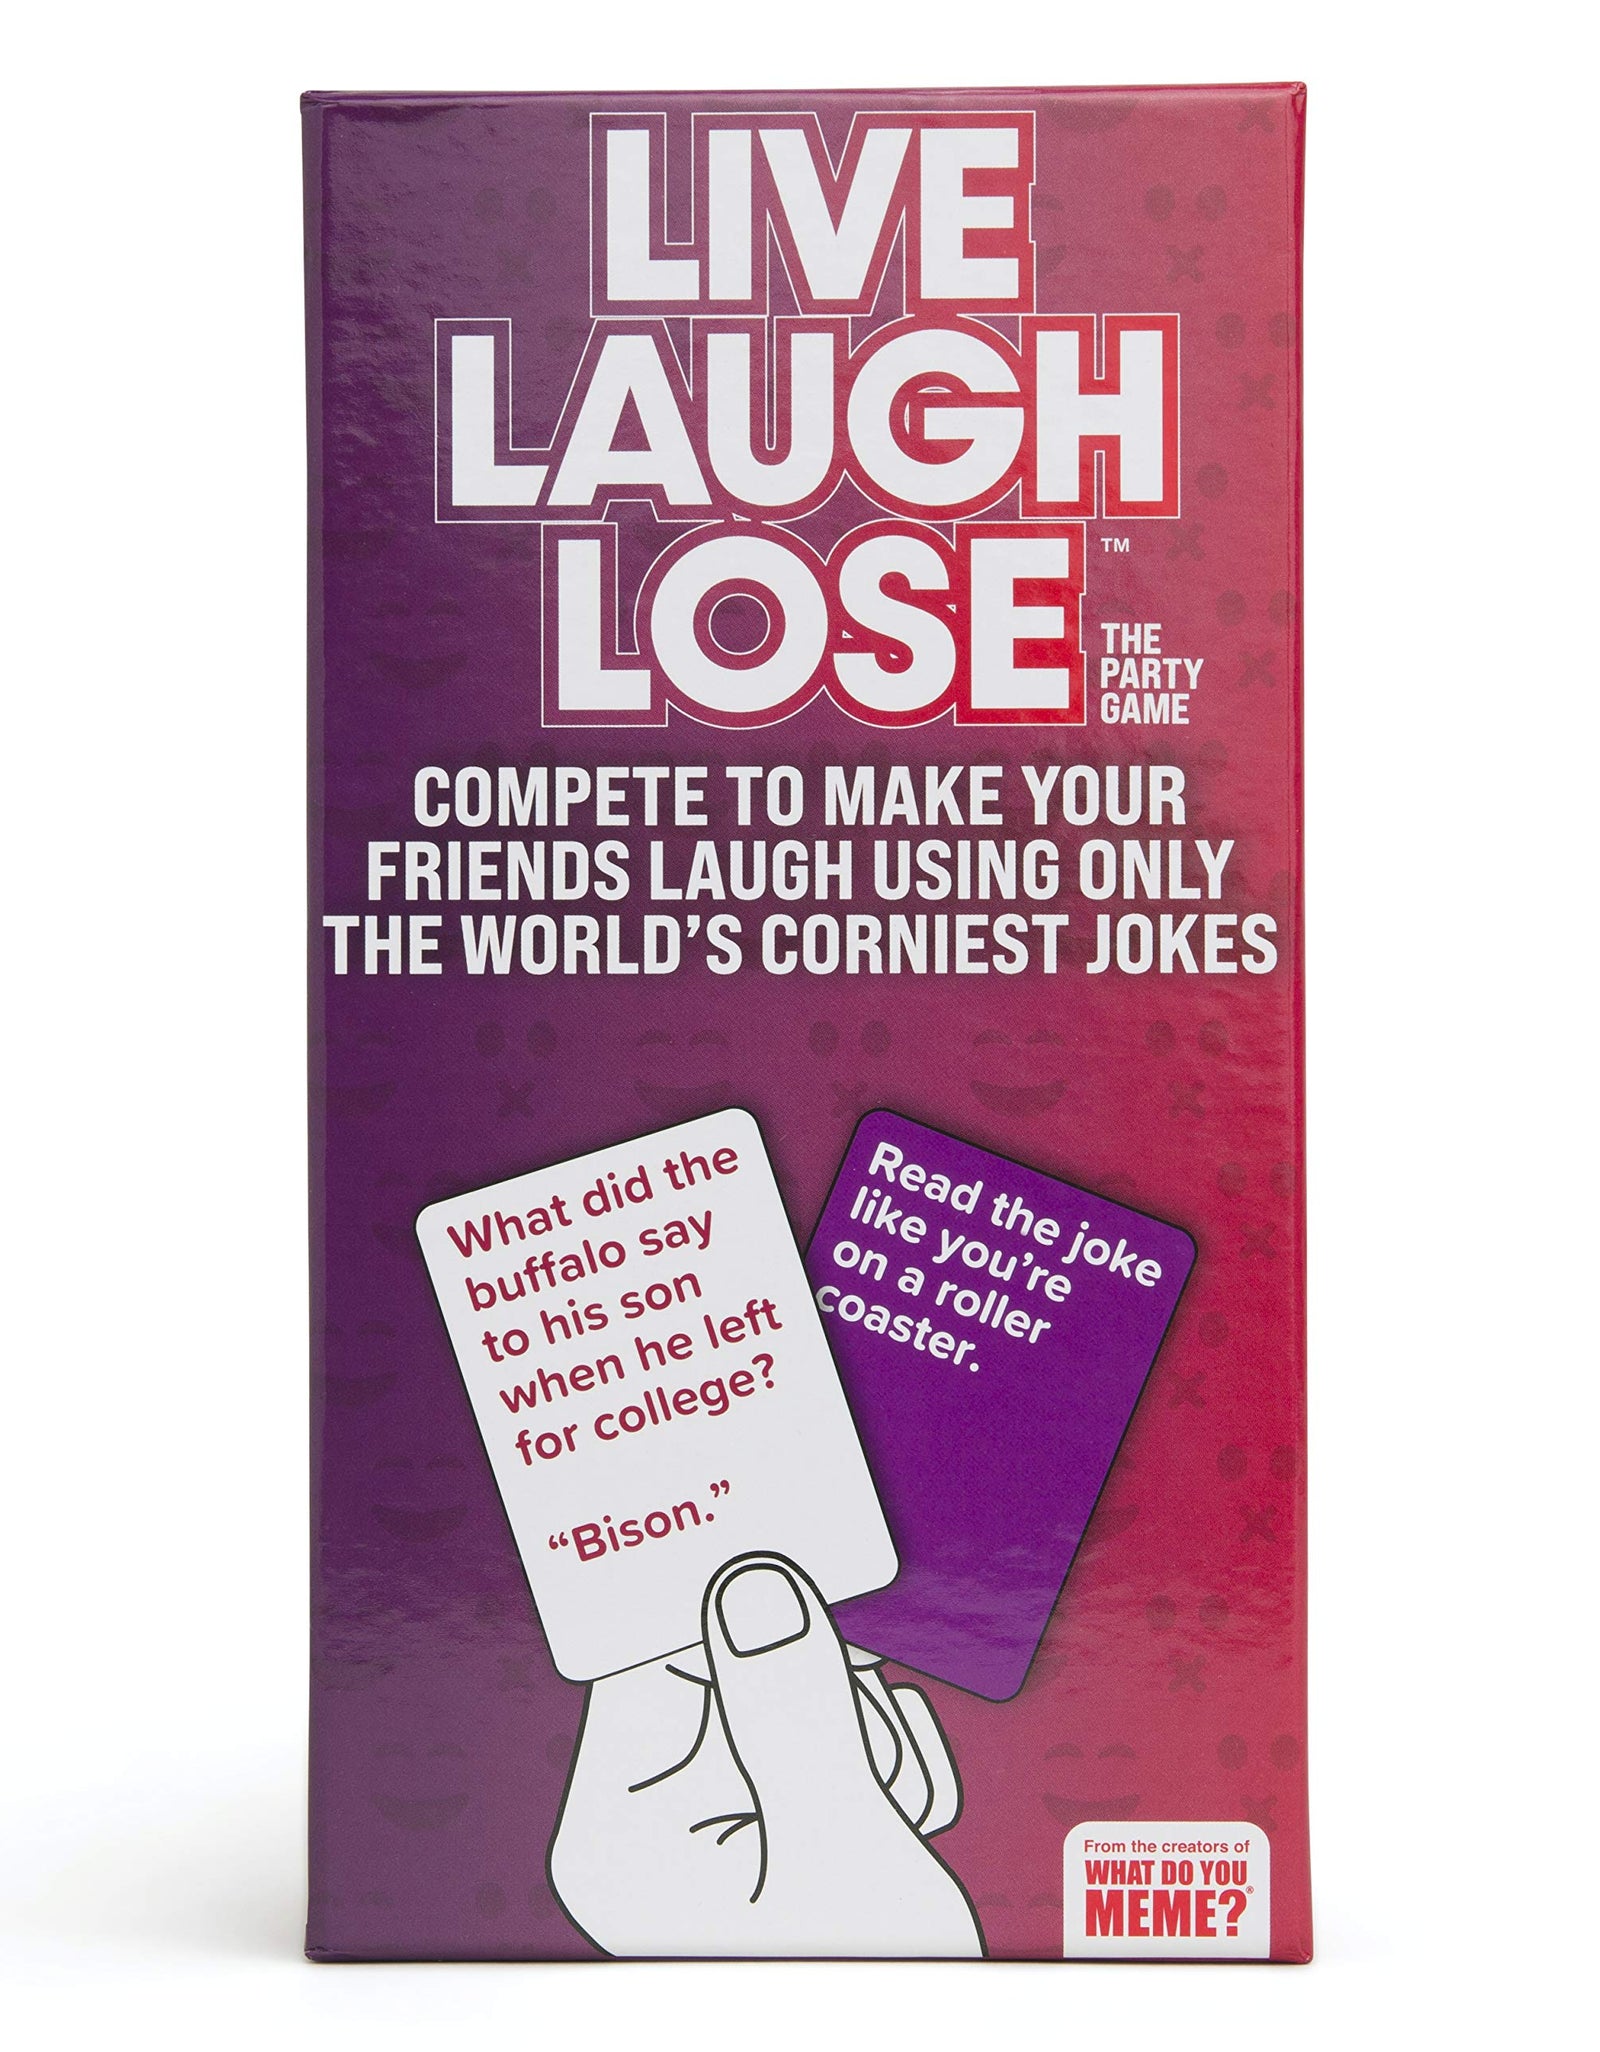 Live Laugh Lose - The Party Game Where You Compete to Make Corny Jokes Funny - by What Do You Meme?